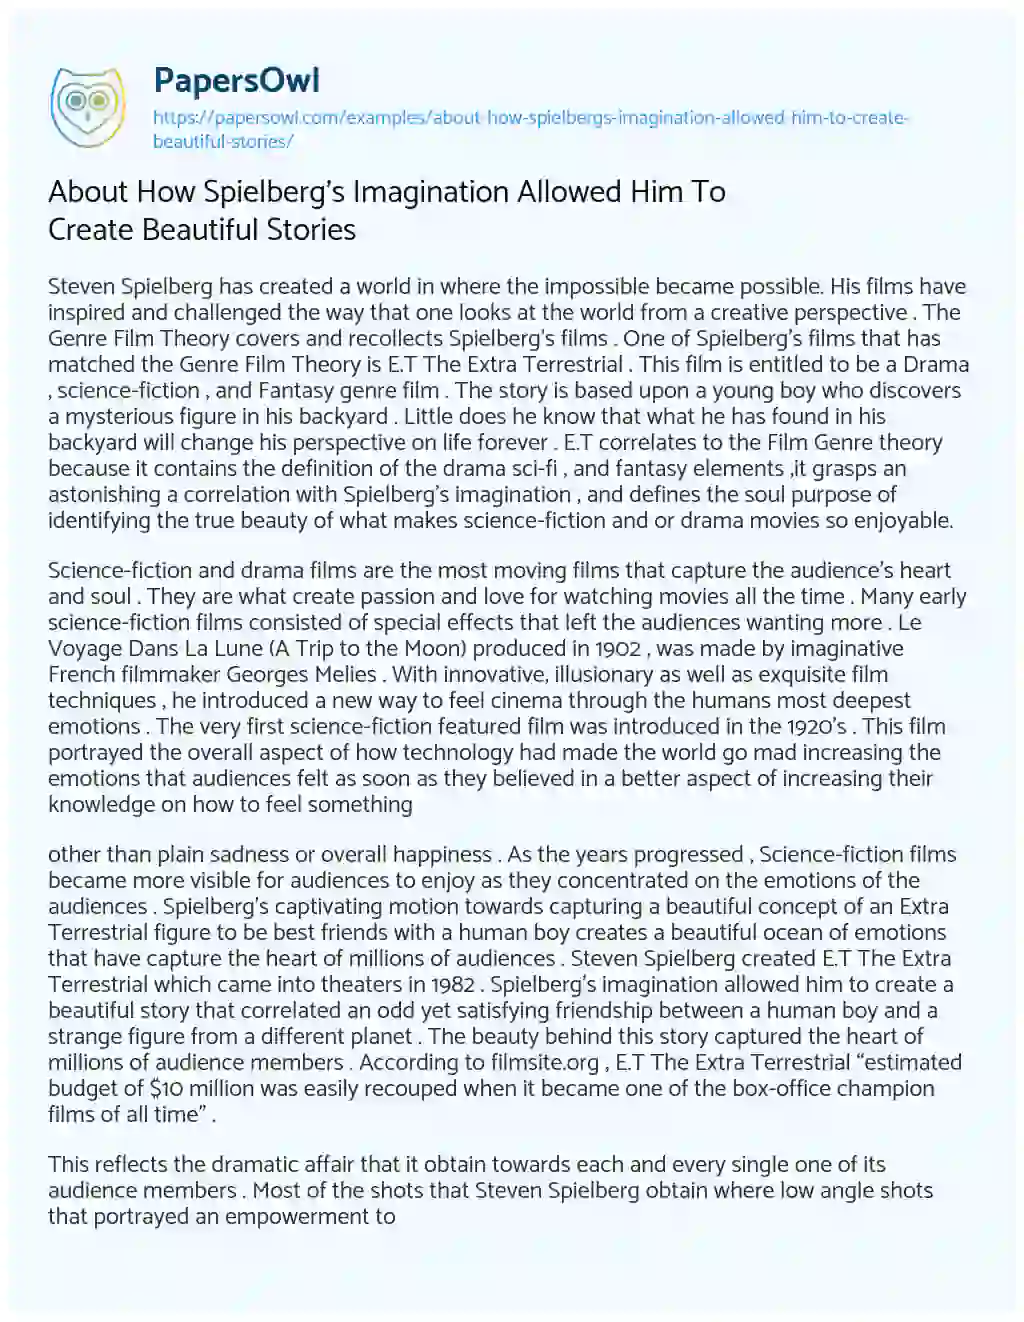 Essay on About how Spielberg’s Imagination Allowed him to Create Beautiful Stories